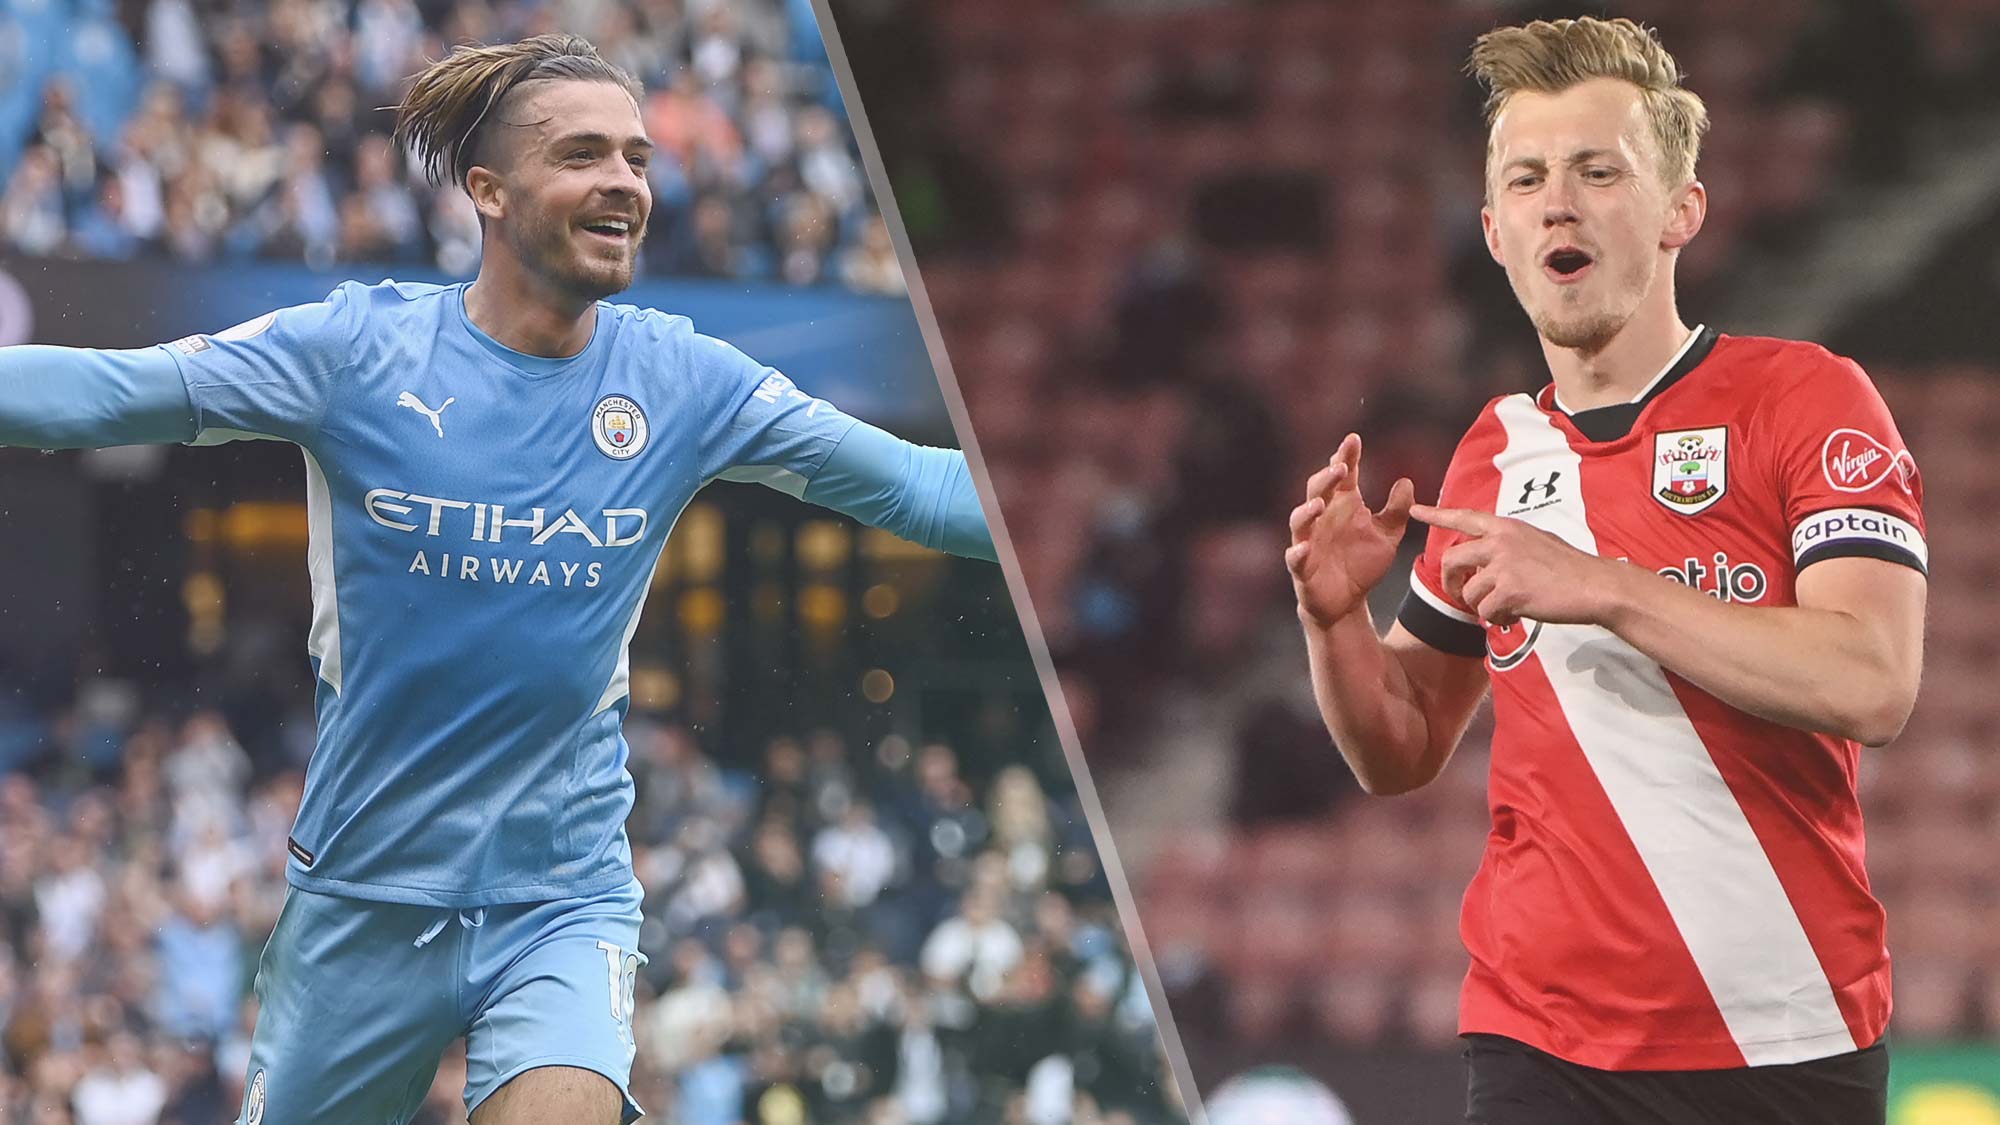 Manchester City vs Southampton live stream — how to watch Premier League 21/22 game online | Tom's Guide